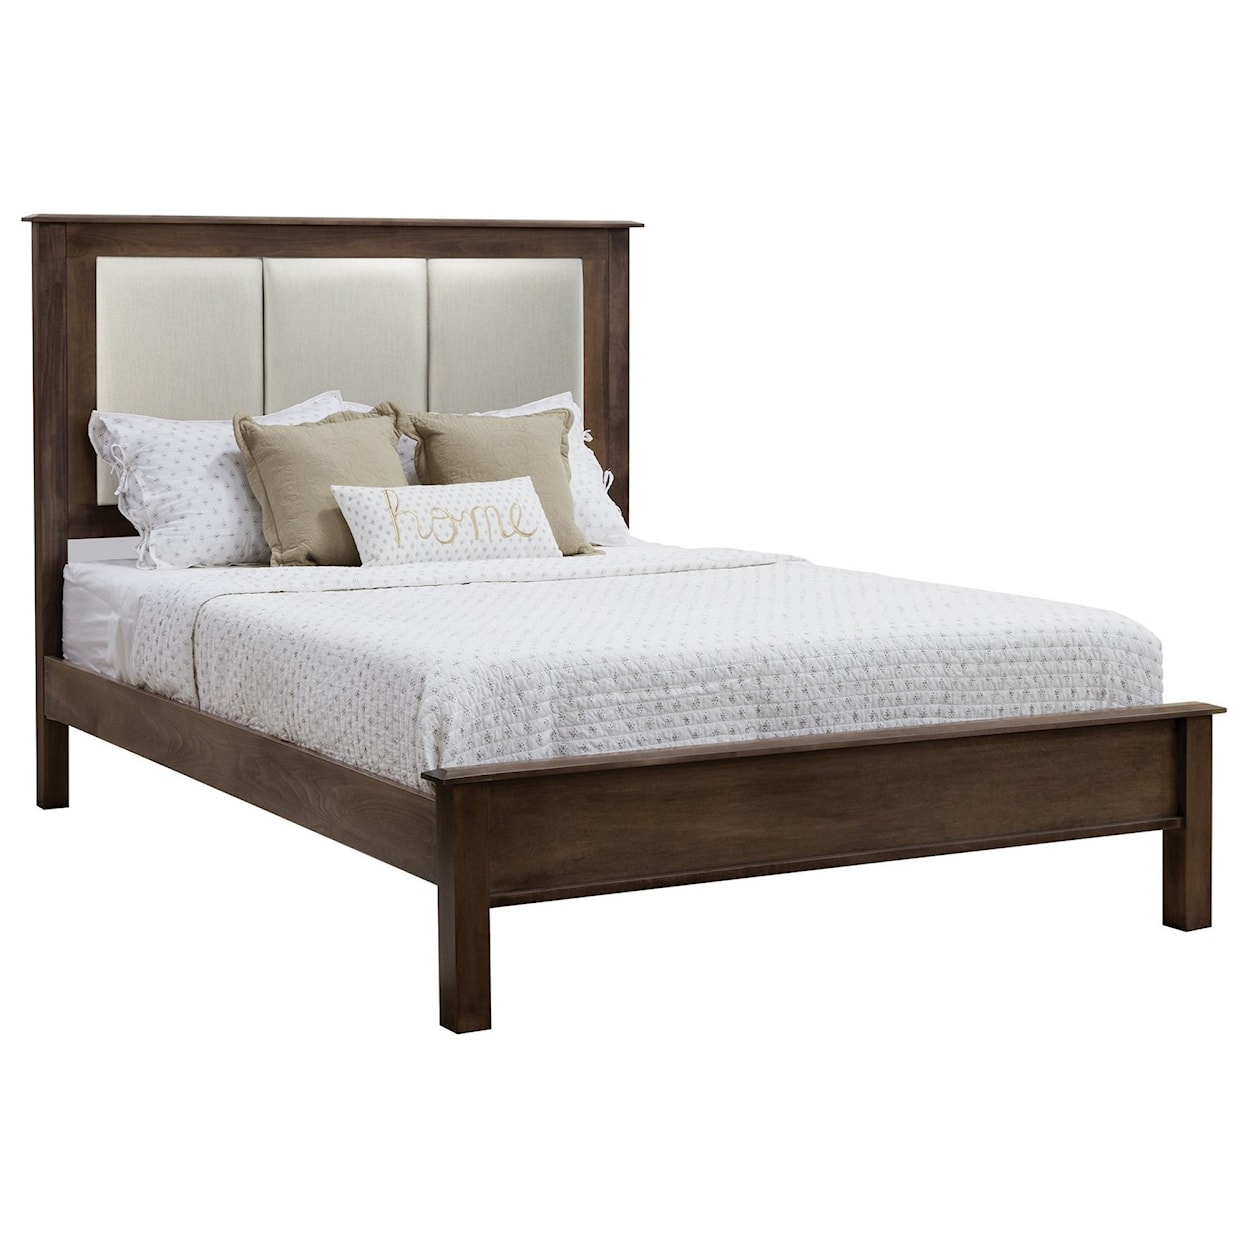 Daniel's Amish Manchester King Multi Panel Fabric Bed